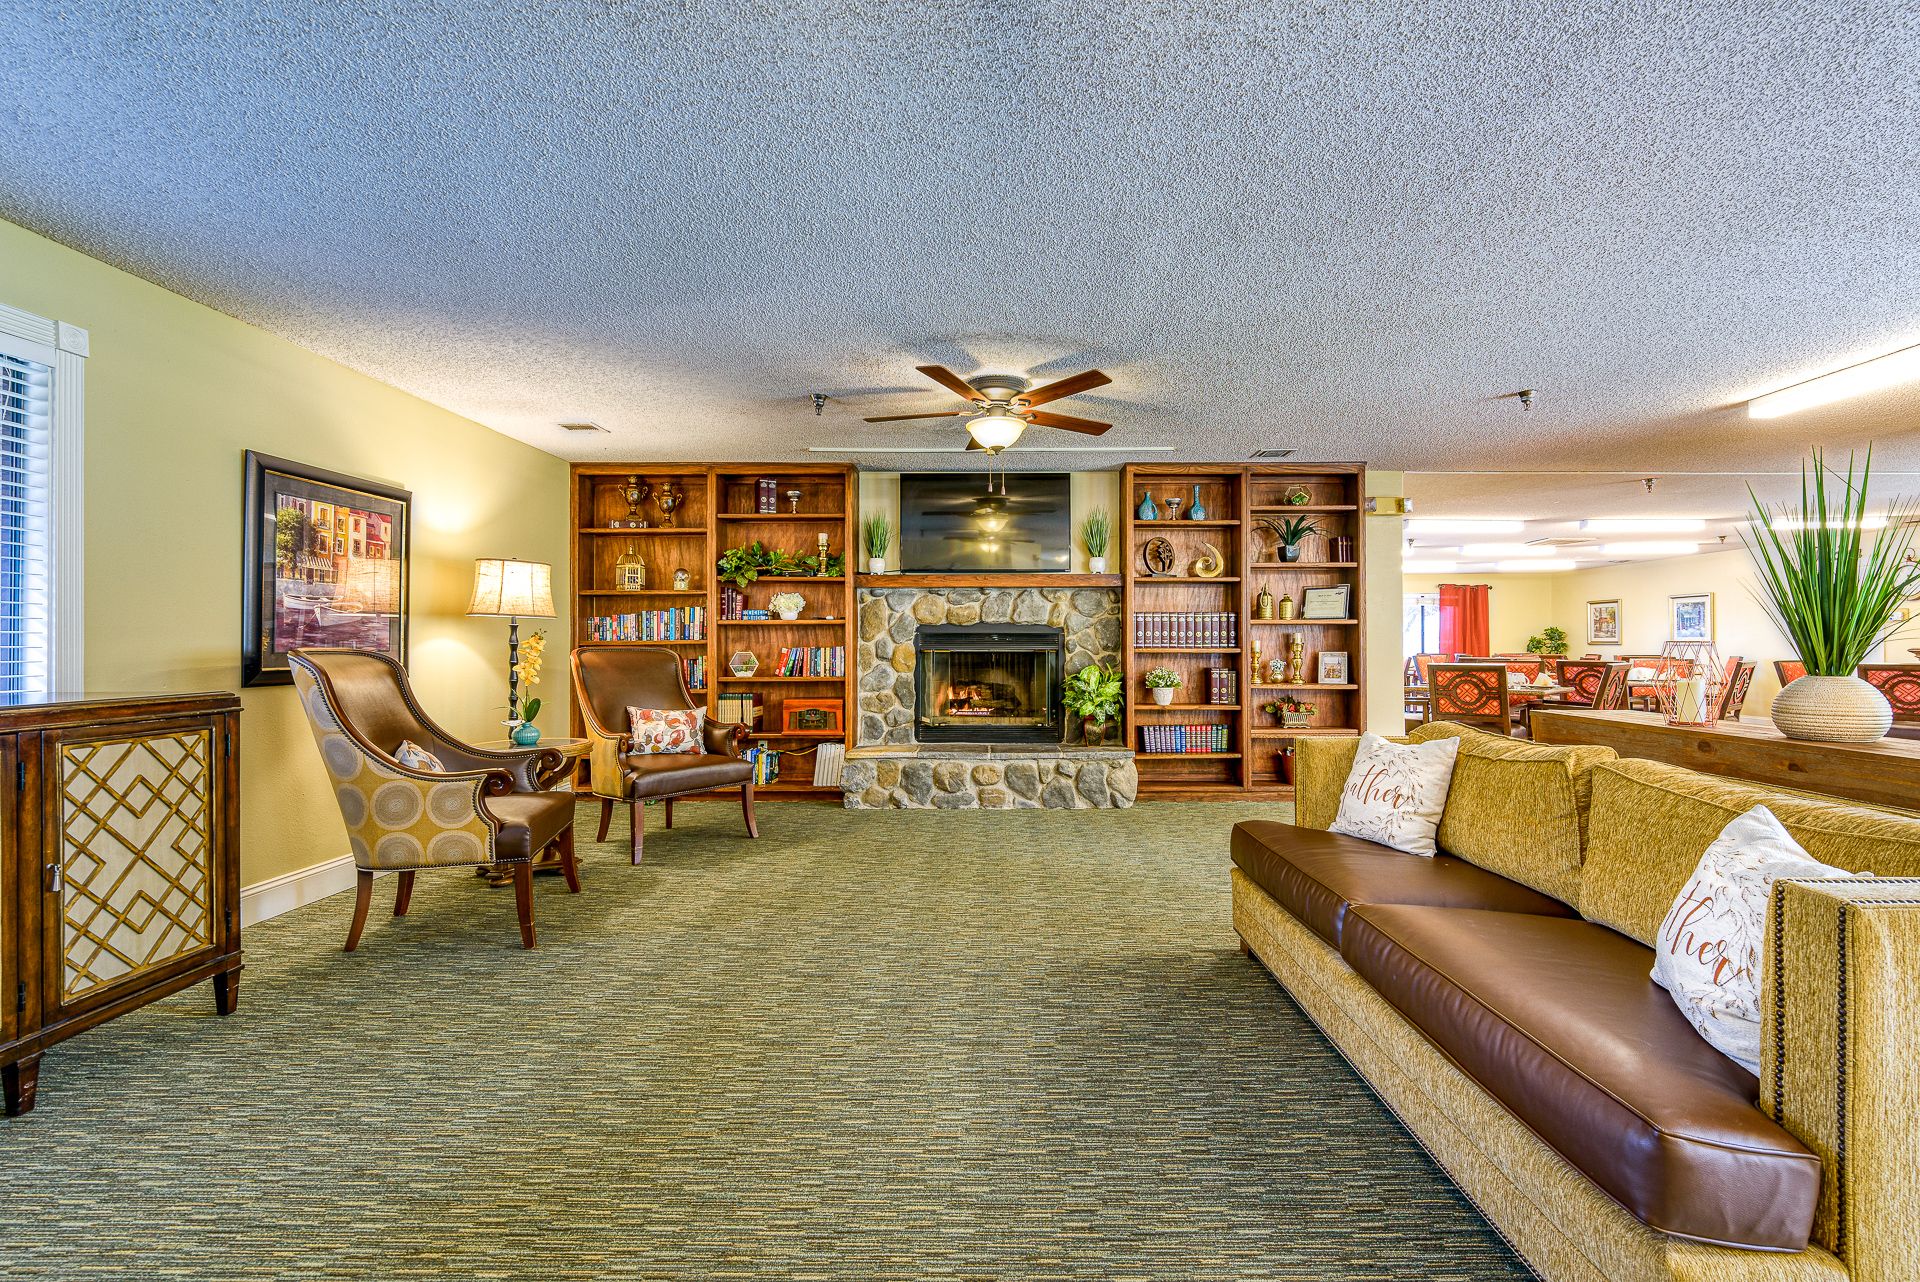 Sierra Vista Independent and Assisted Living 1